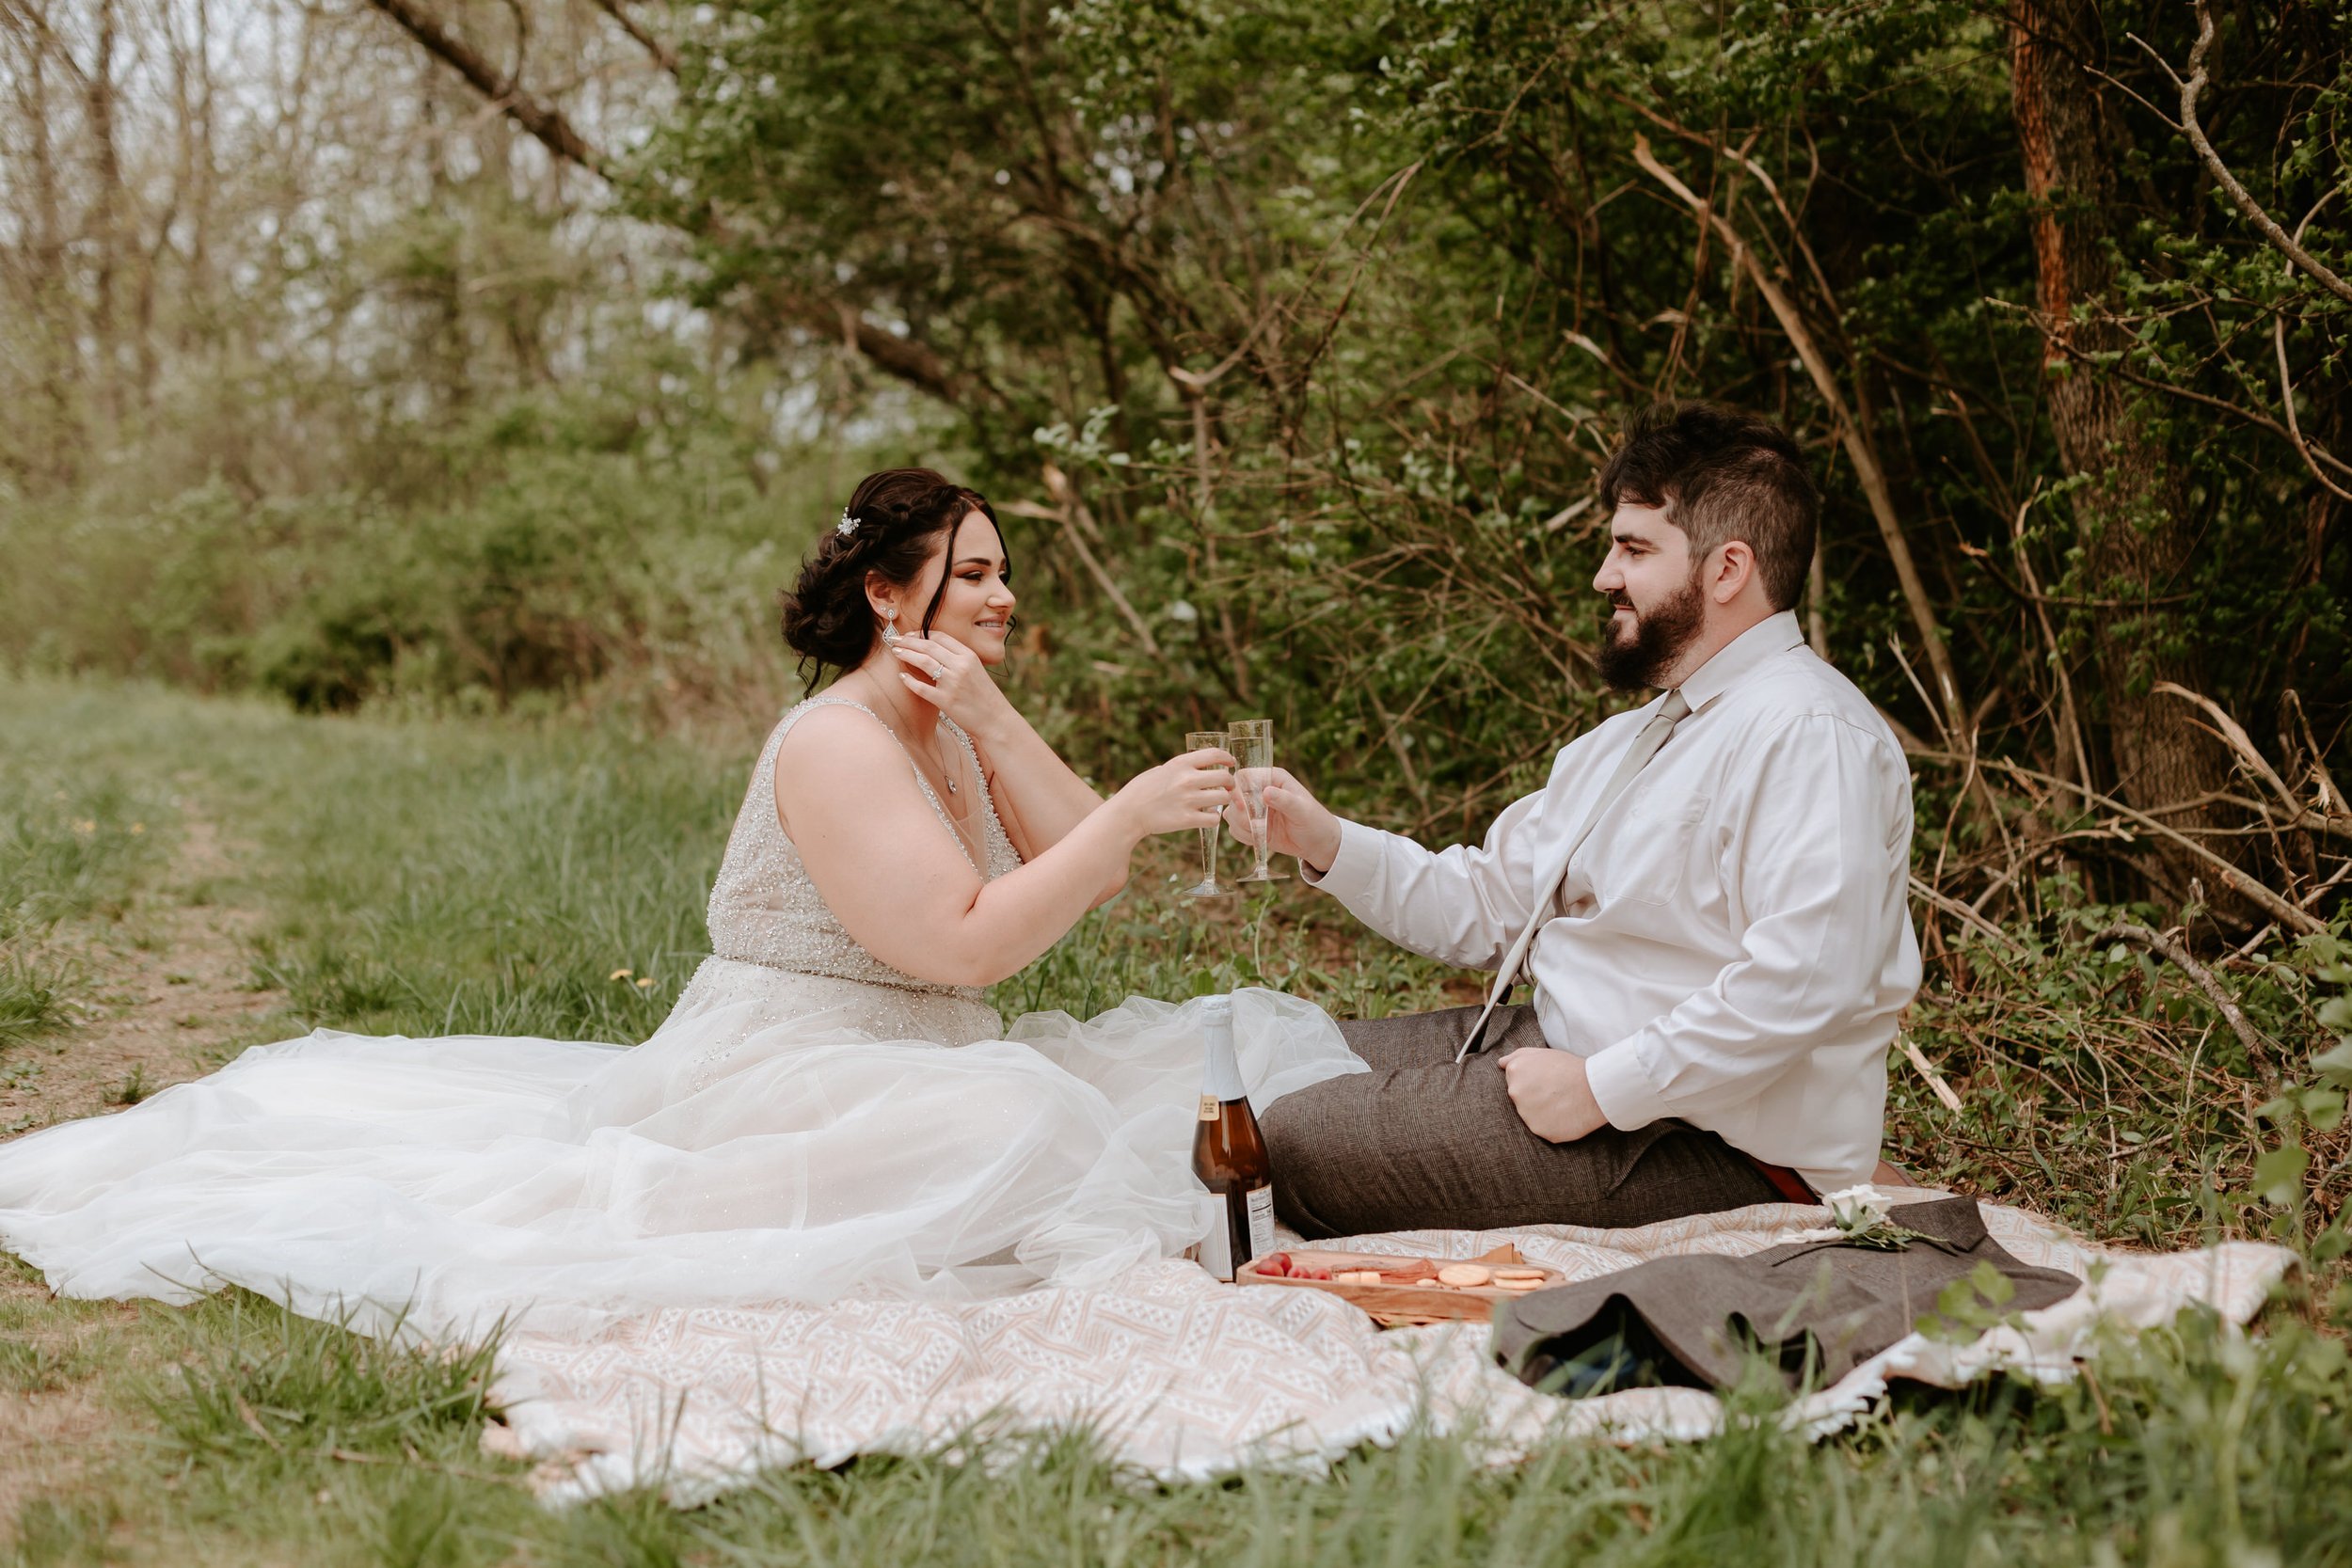 Couple sits on blanket and share a champagne toast.